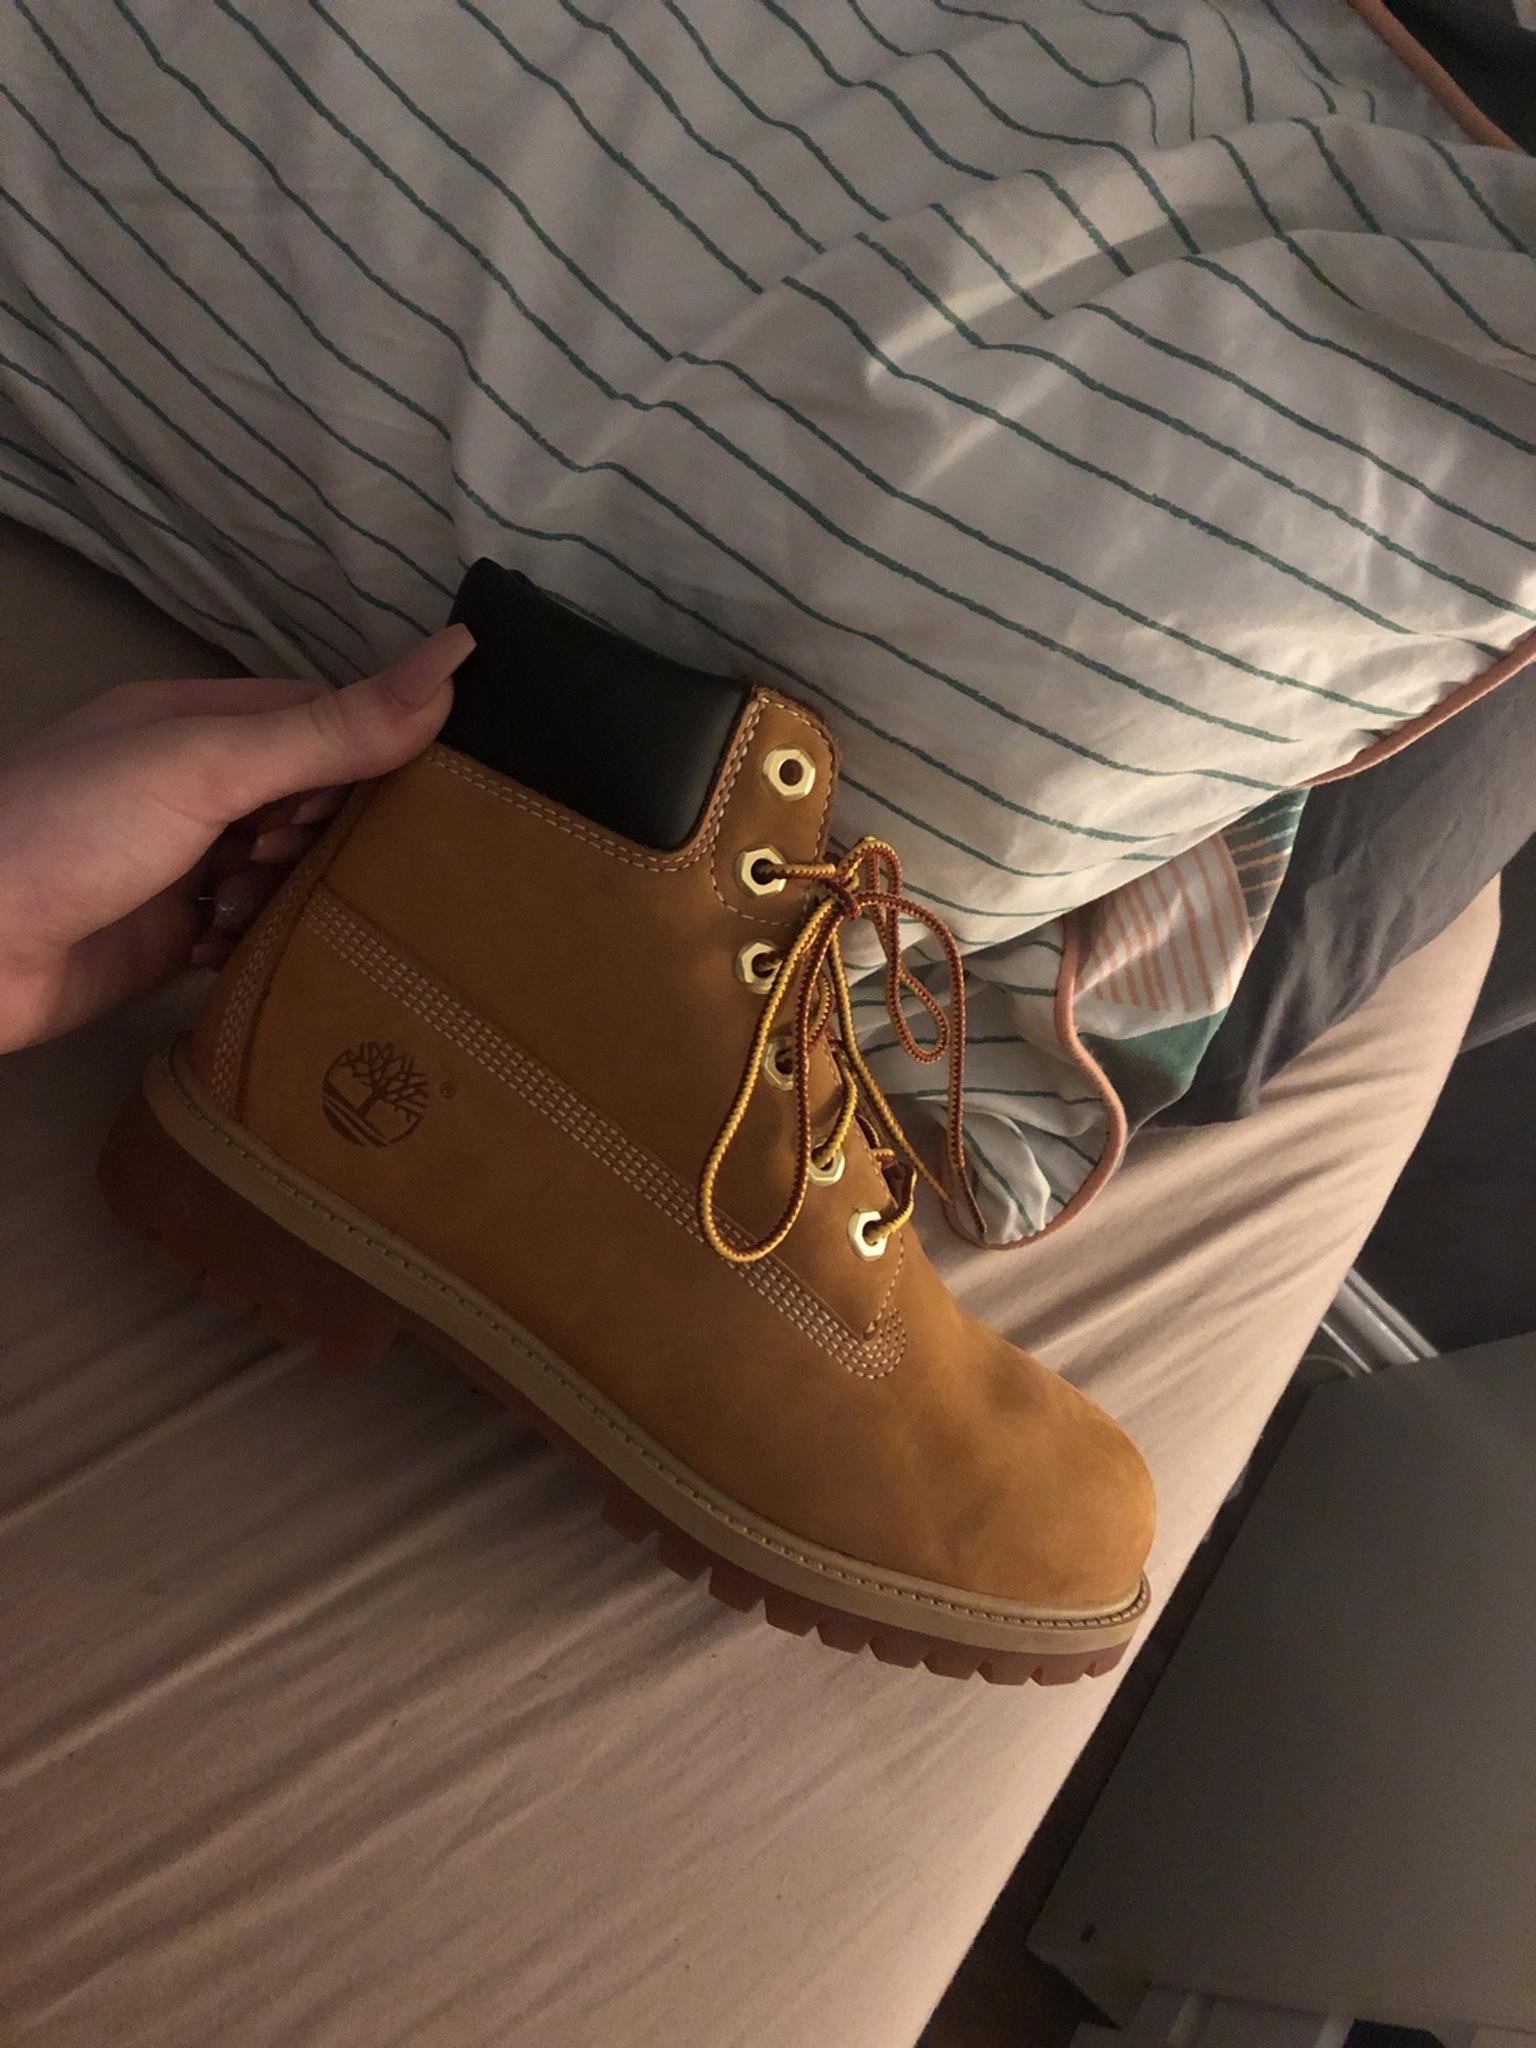 inside of timberland boots